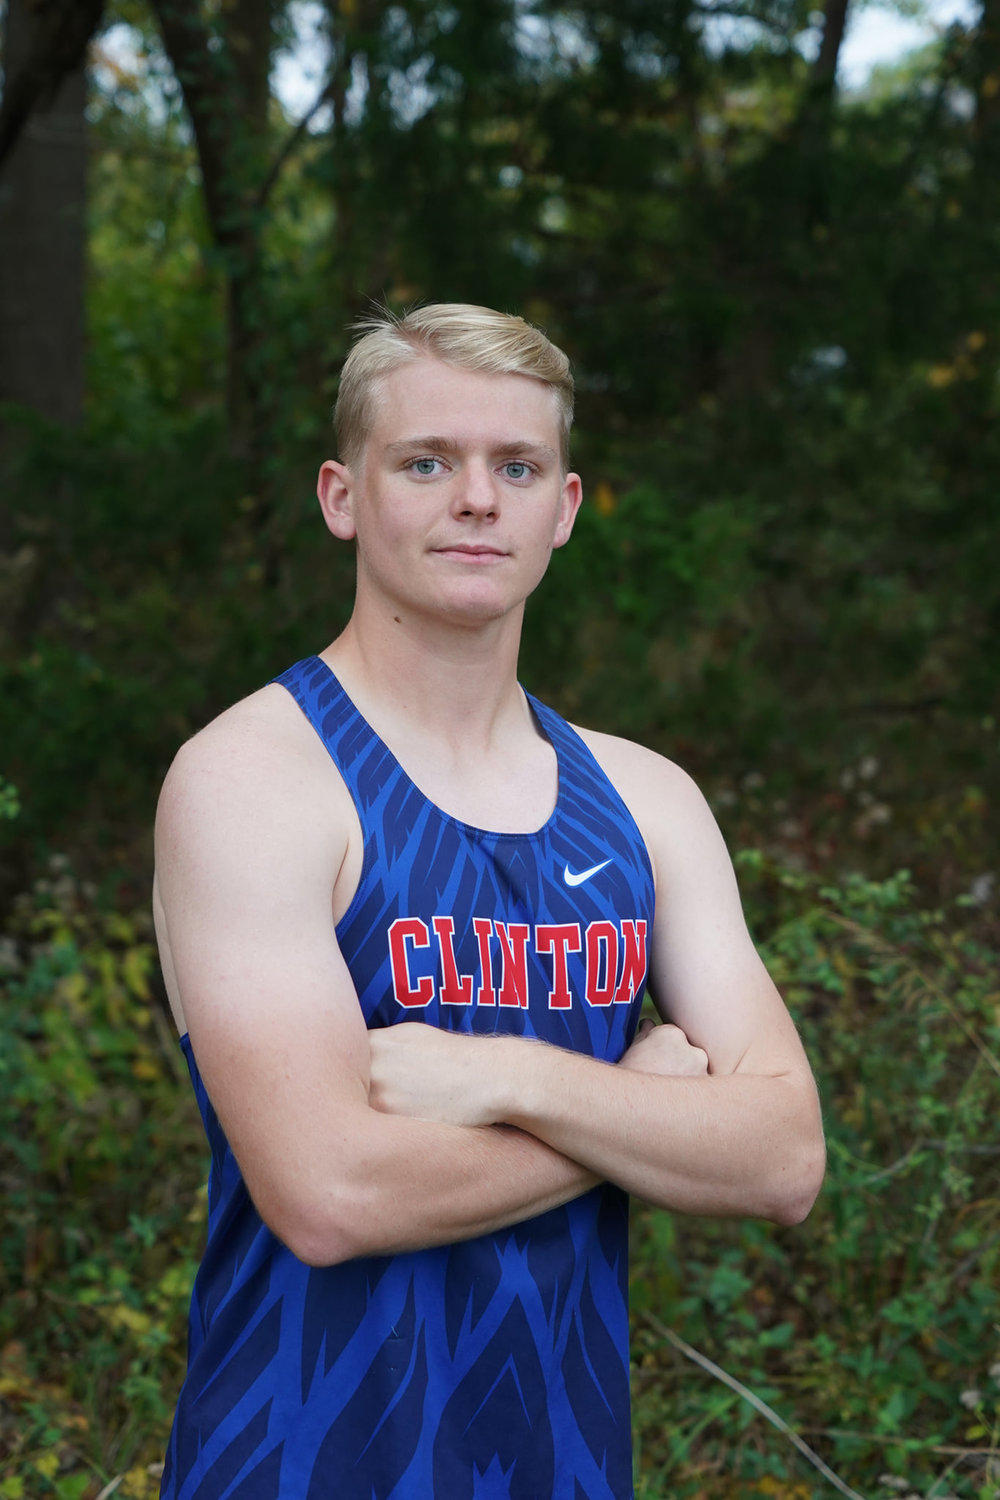 CHS SENIOR Gage Mantonya qualified for the State XC Meet in Columbia.